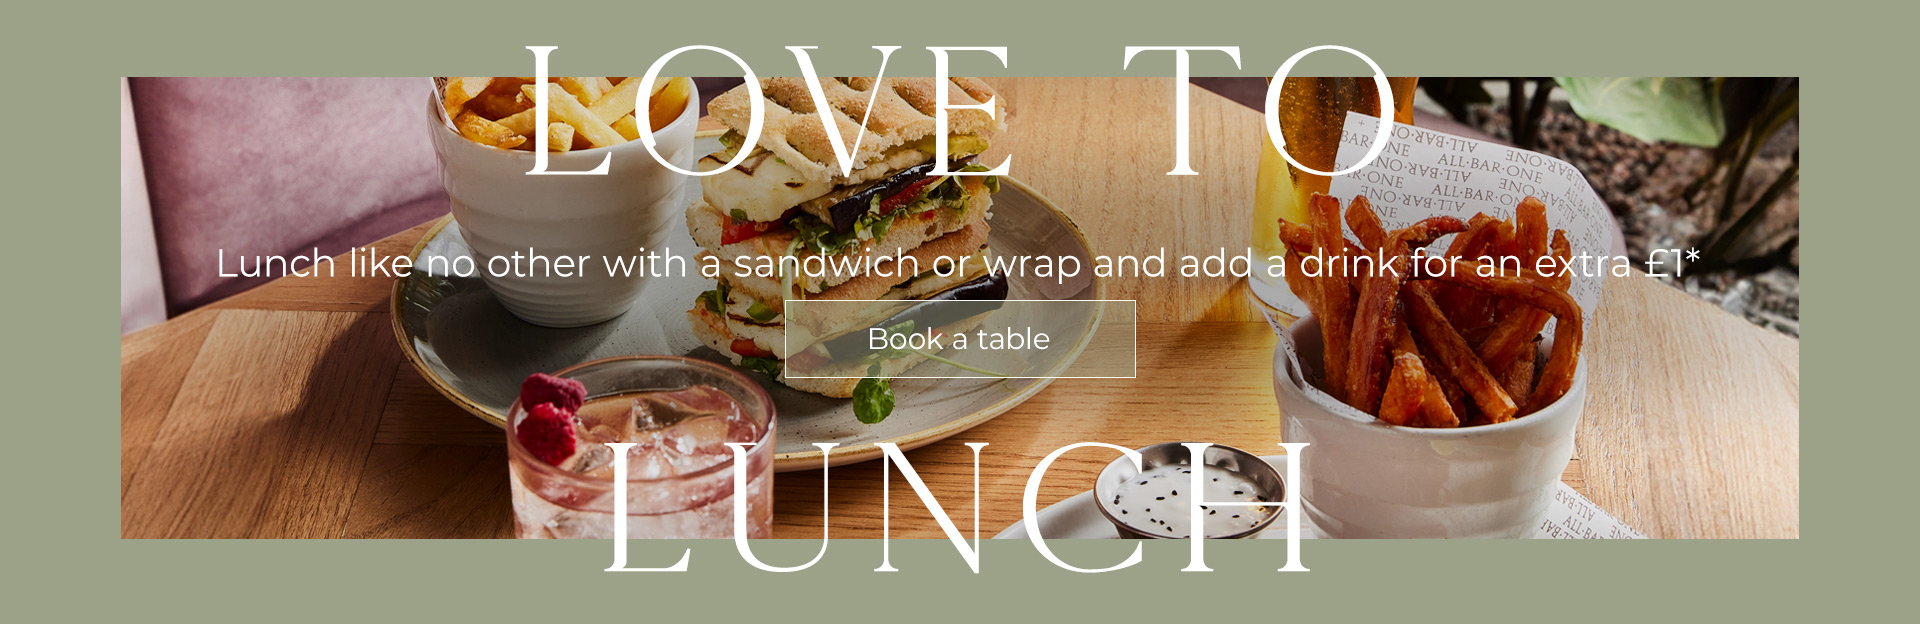 Lunch Offer at All Bar One Stratford Upon Avon